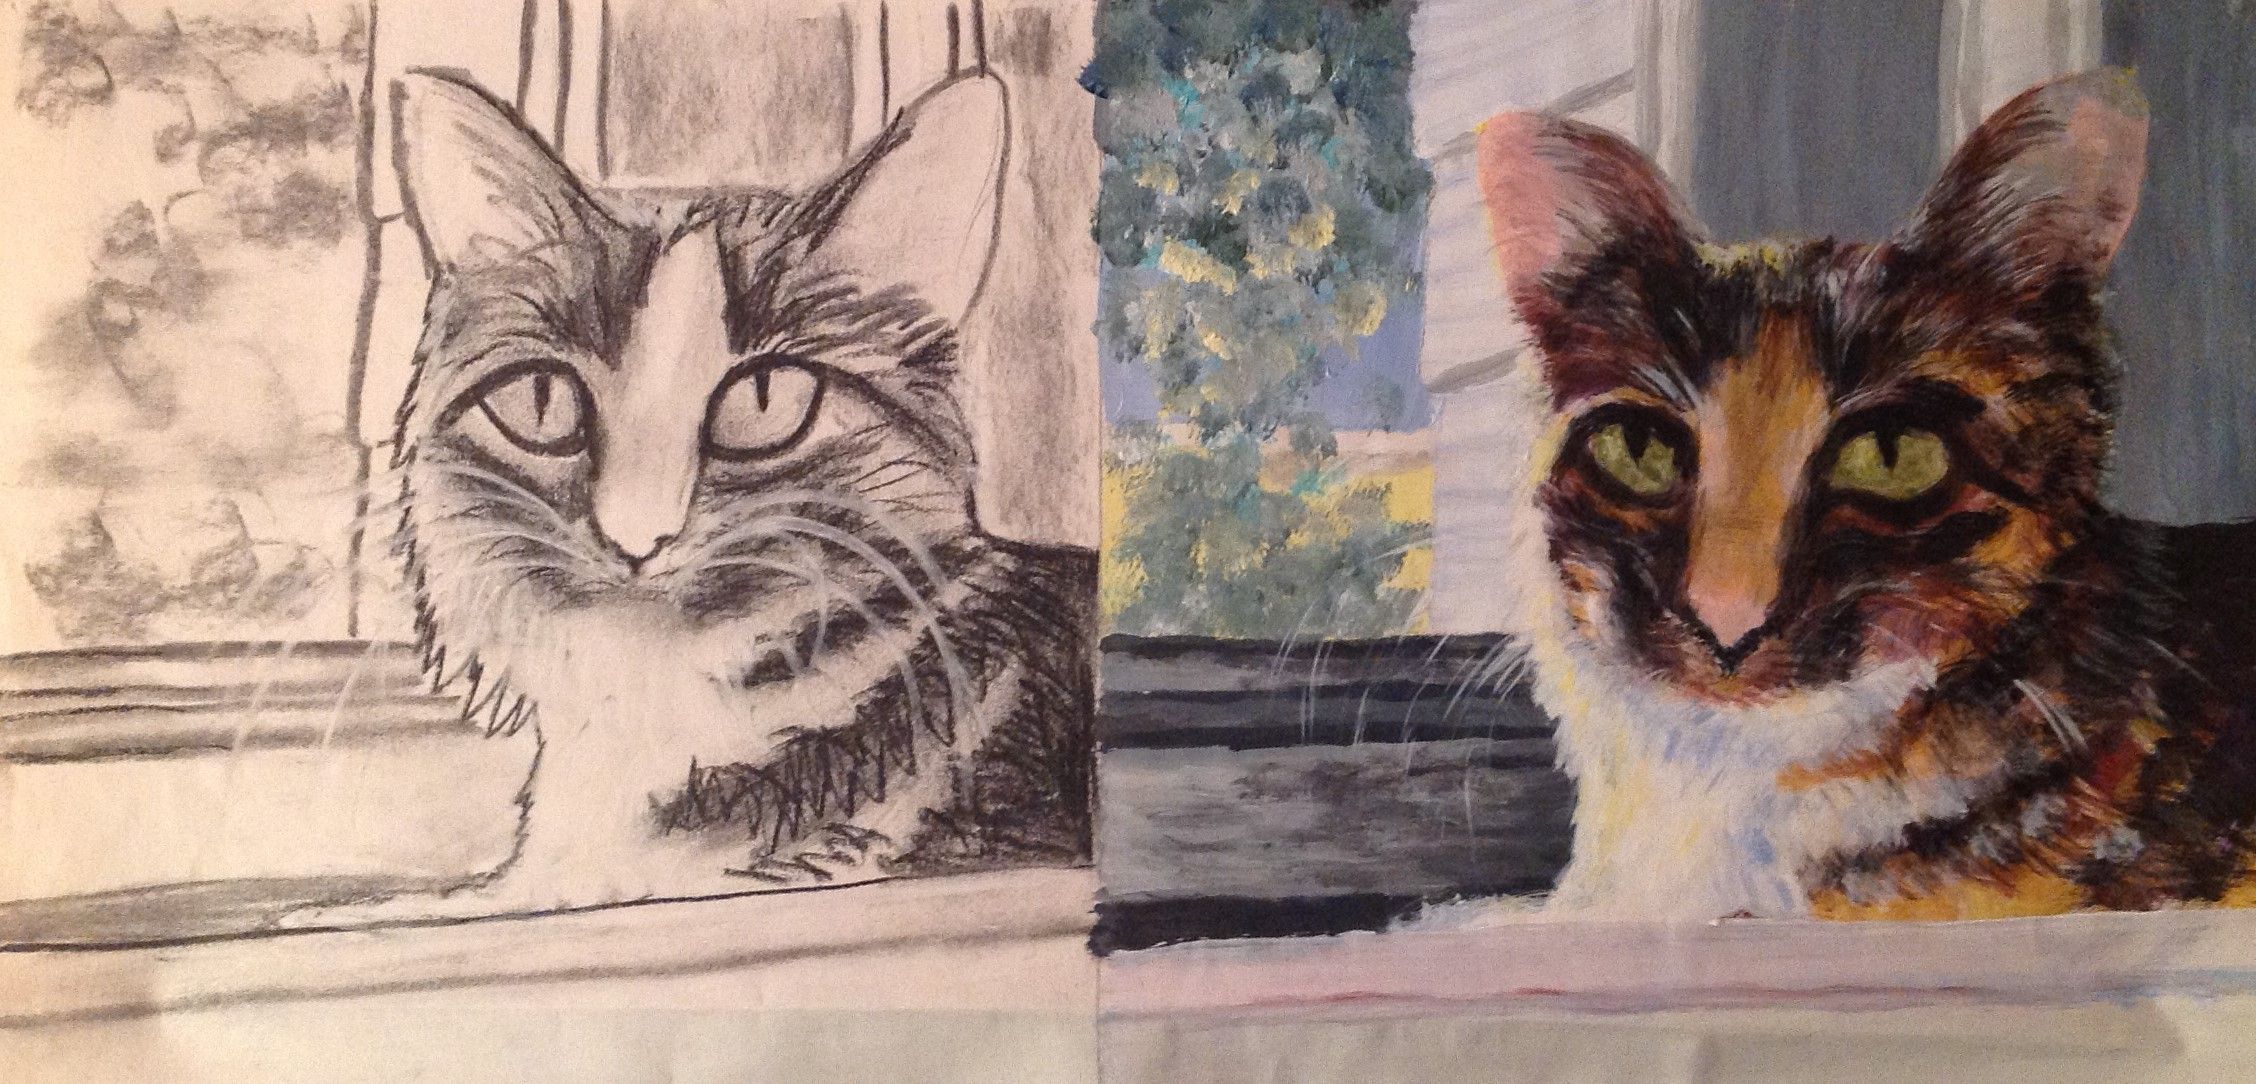 Lucy Ballofur, 1991
Charcoal and Pastel on Paper
18"W x 8"H, Walli White, artist